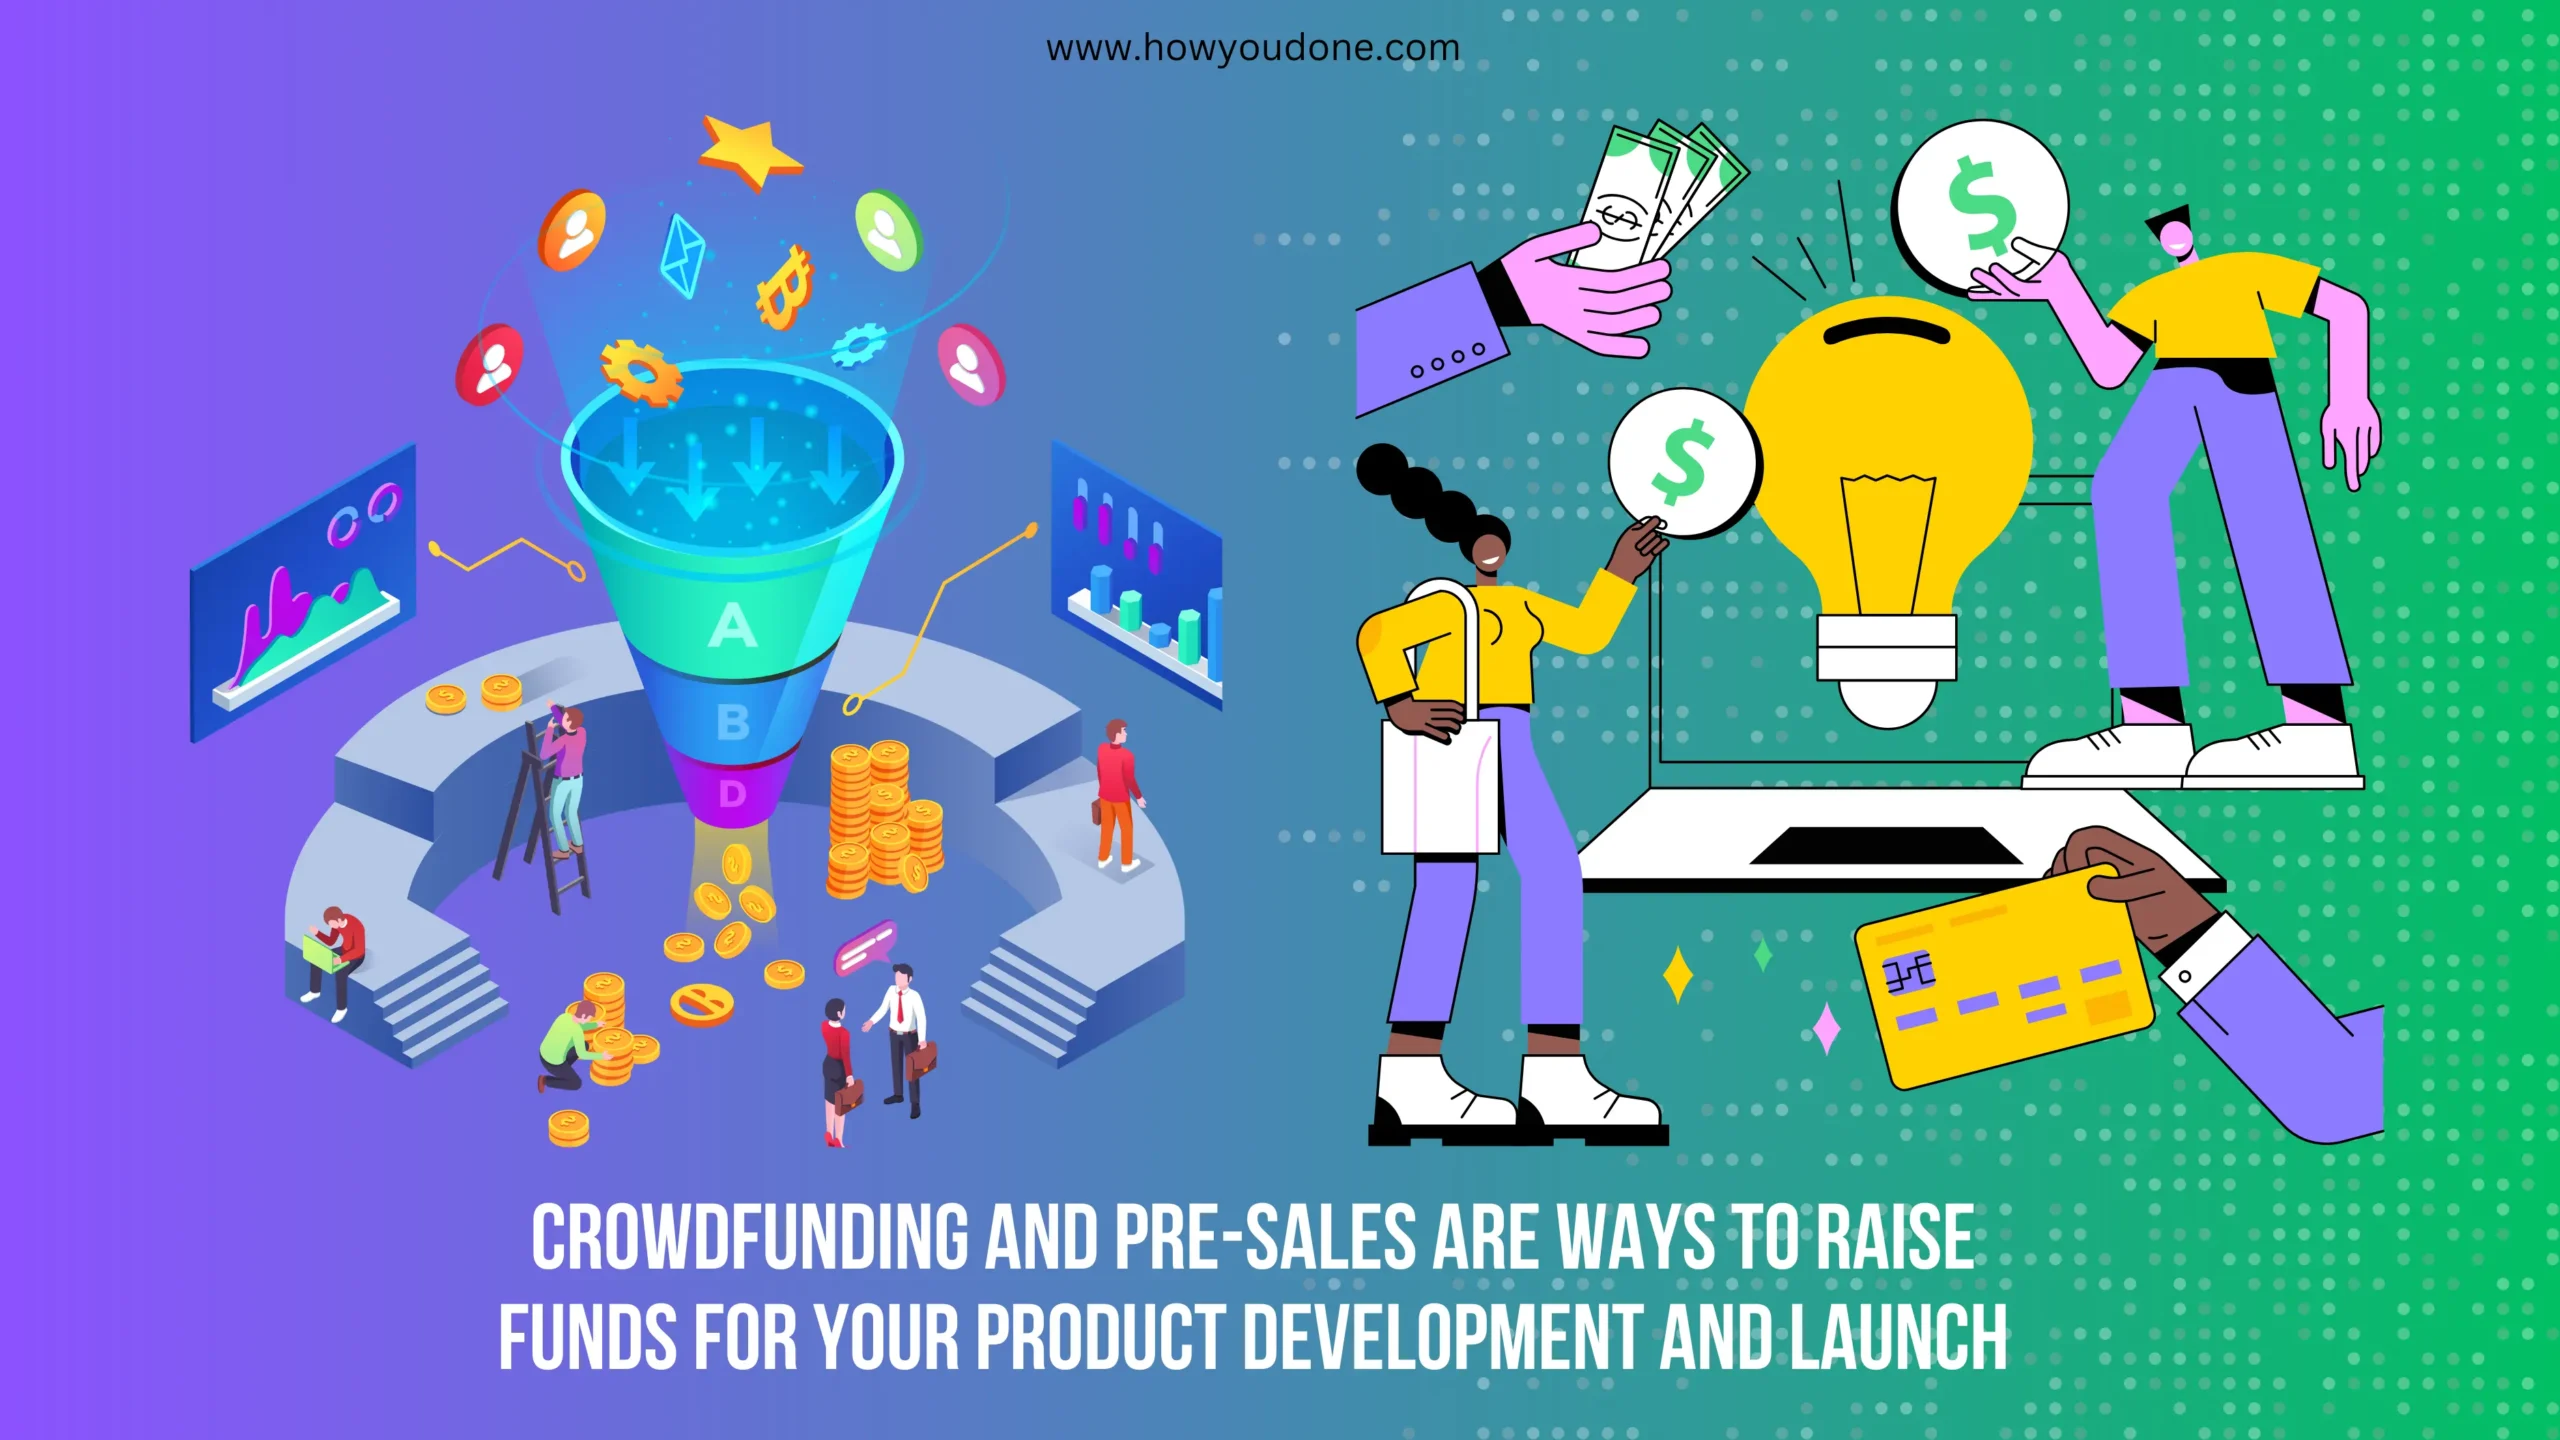 crowdfunding and pre sales for product-based business